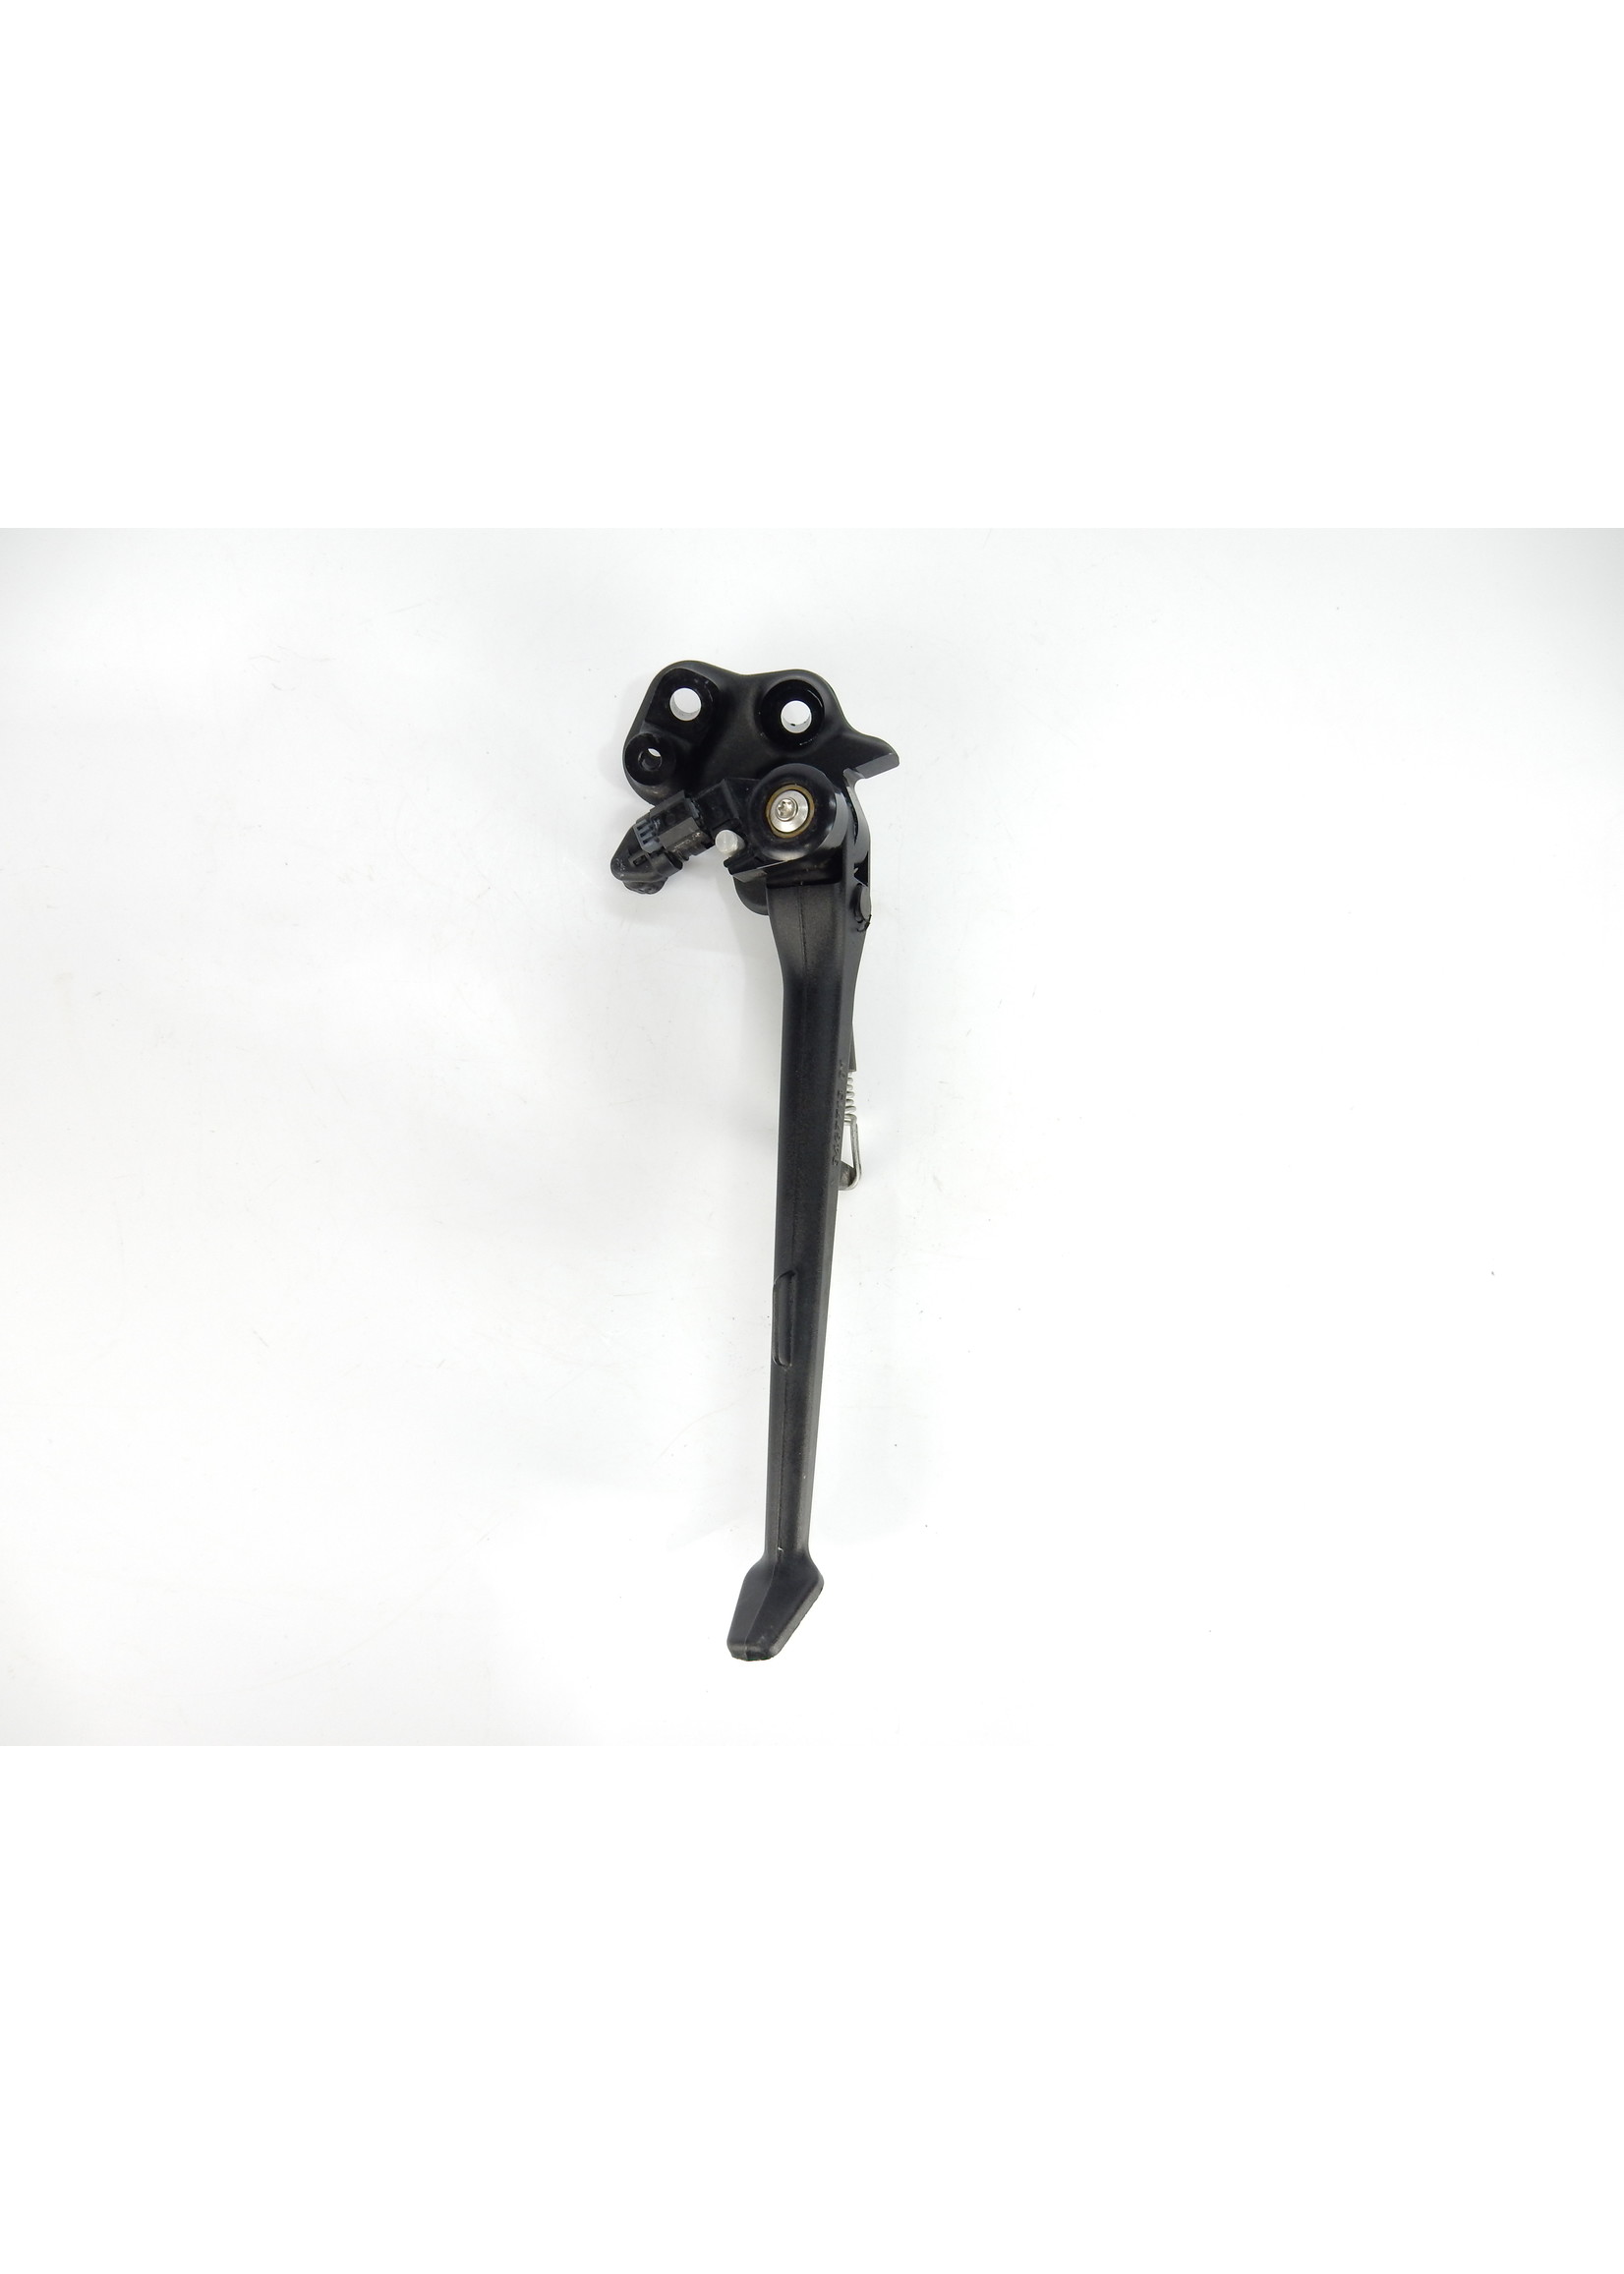 BMW BMW S 1000 R Side stand / Supporting bracket f side stand / Switch, side stand / 46539467713 / 46538373657 / 61318388642